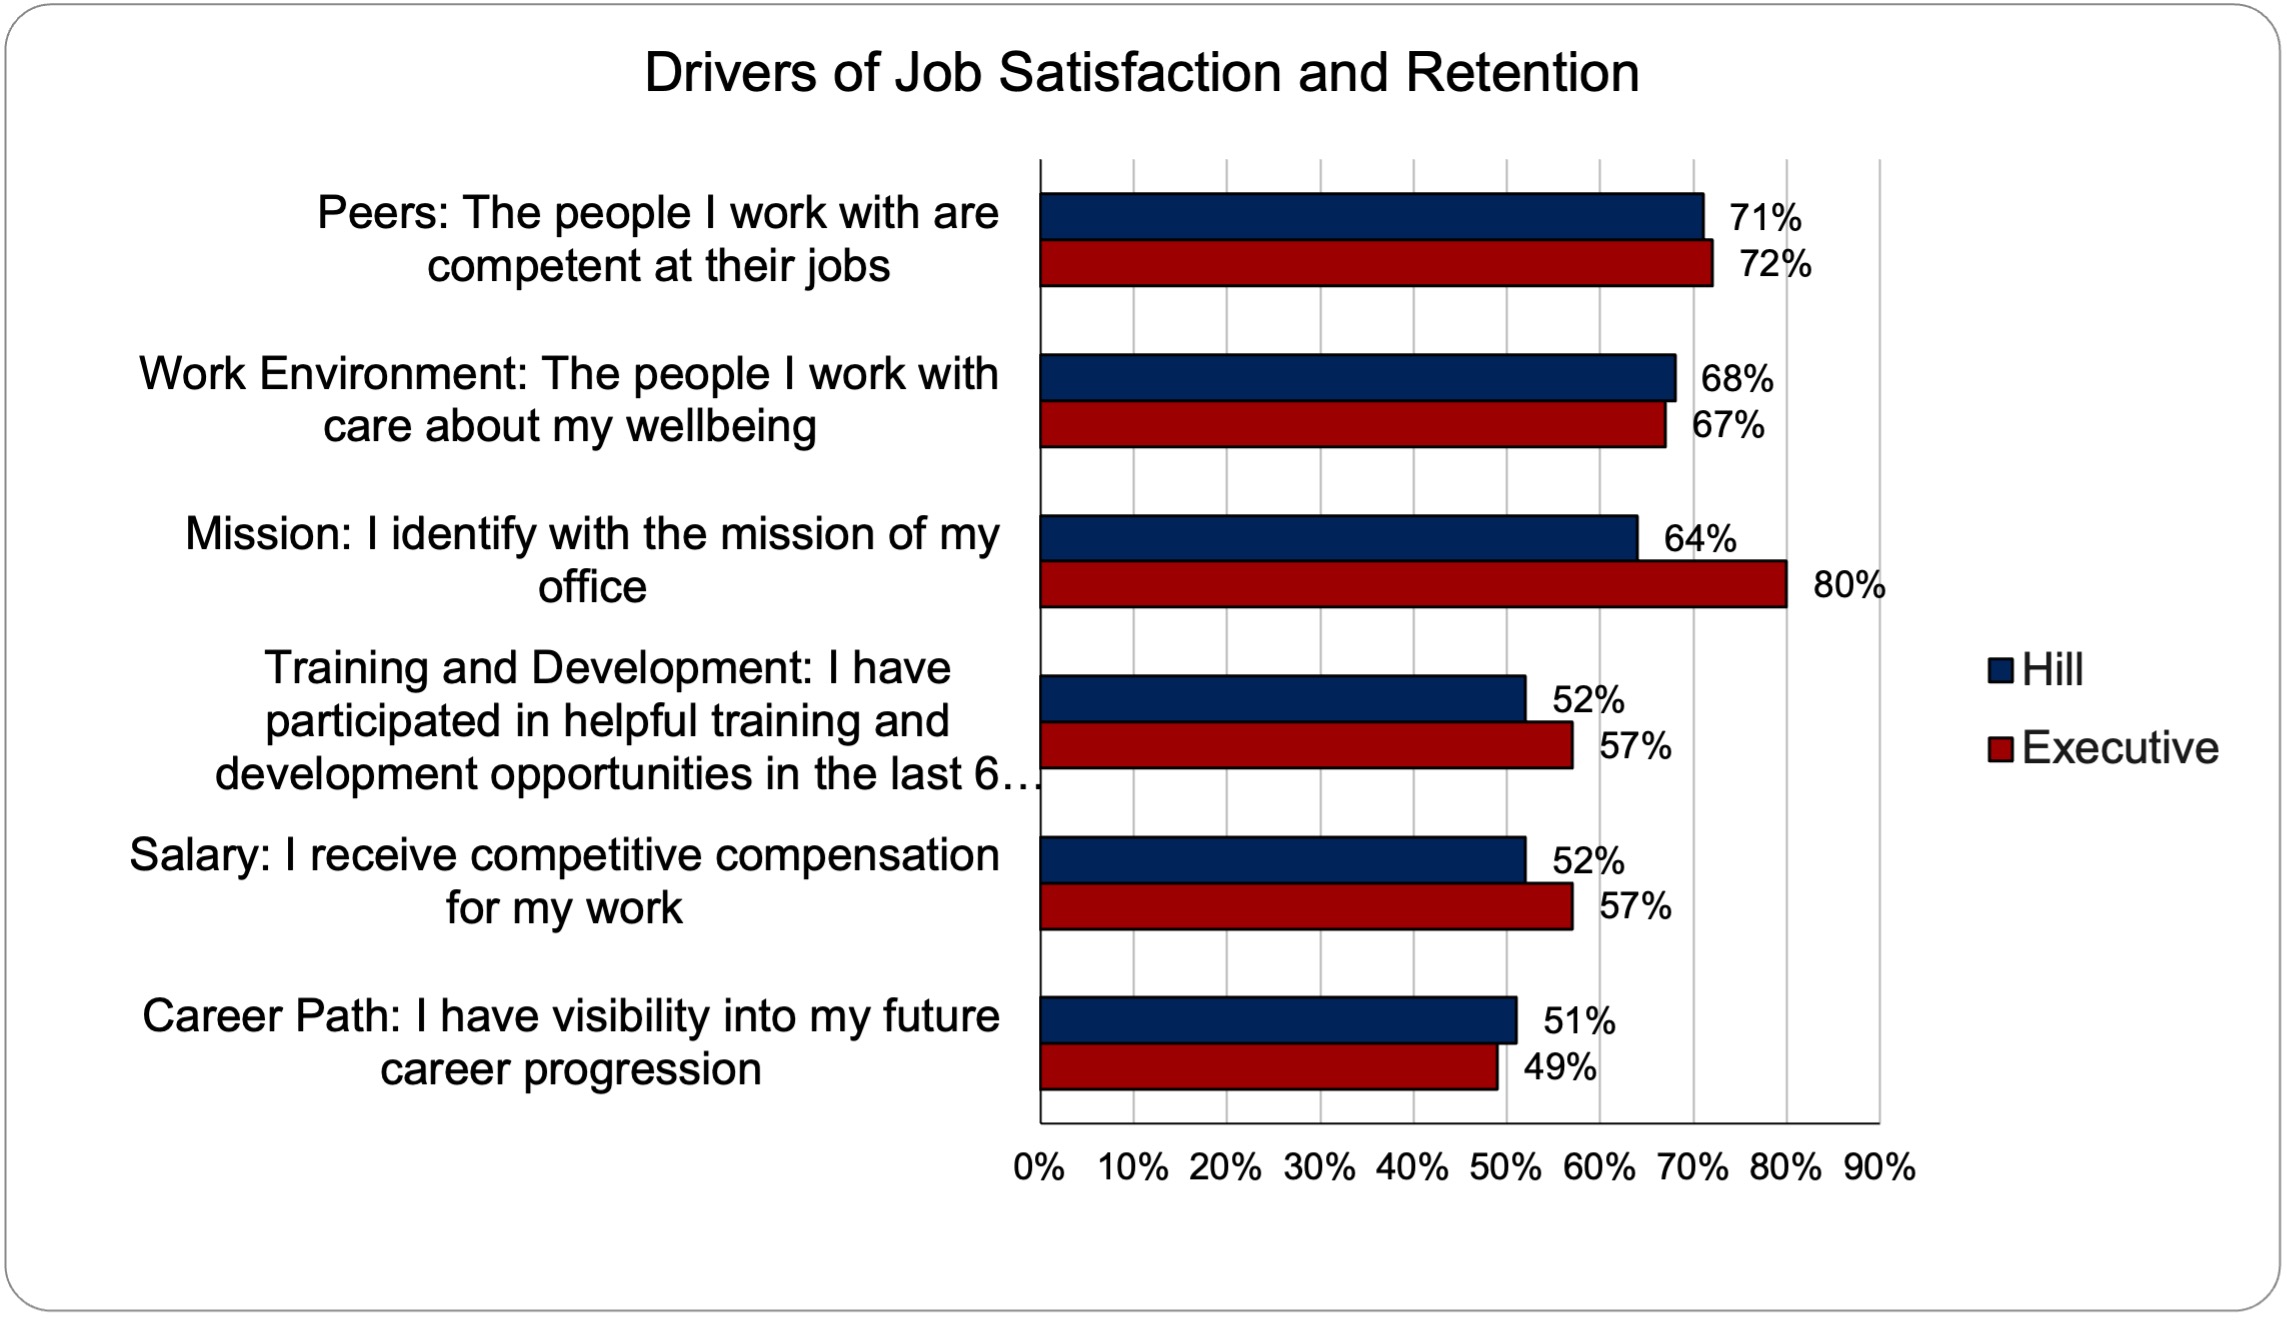 Drivers of job satisfaction and retention